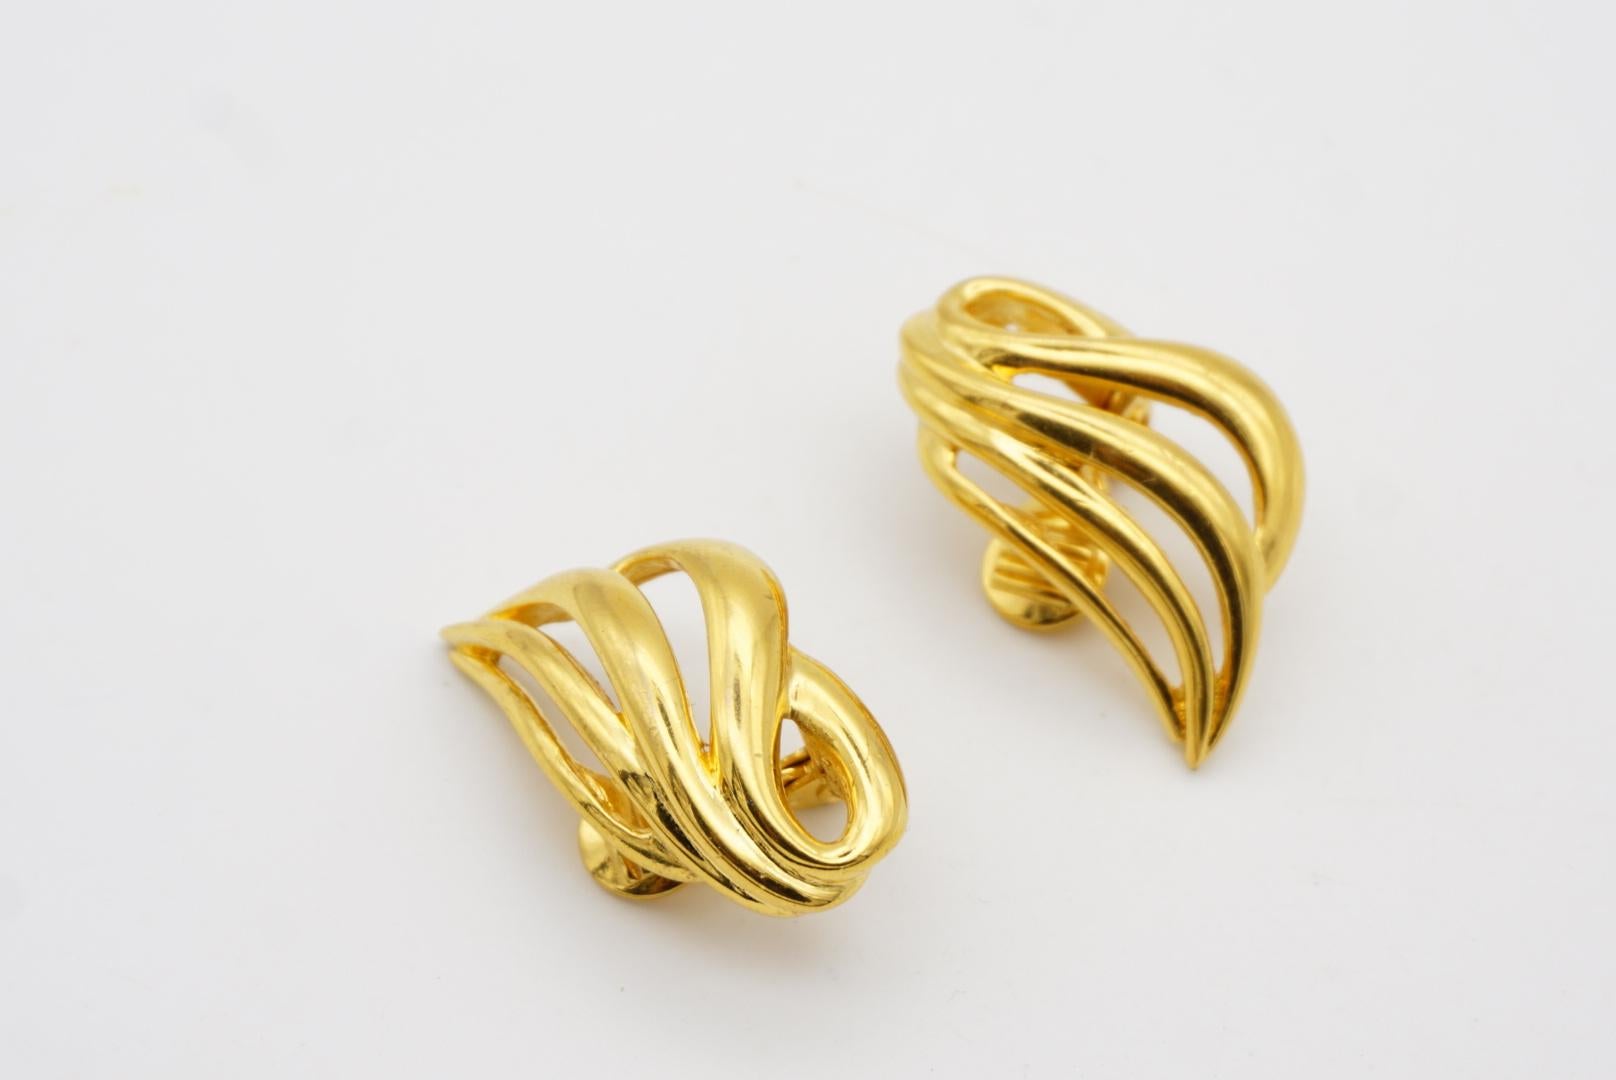 Monet Vintage 1970s Classic Openwork Wing Fire Leaf Elegant Gold Clip Earrings For Sale 2